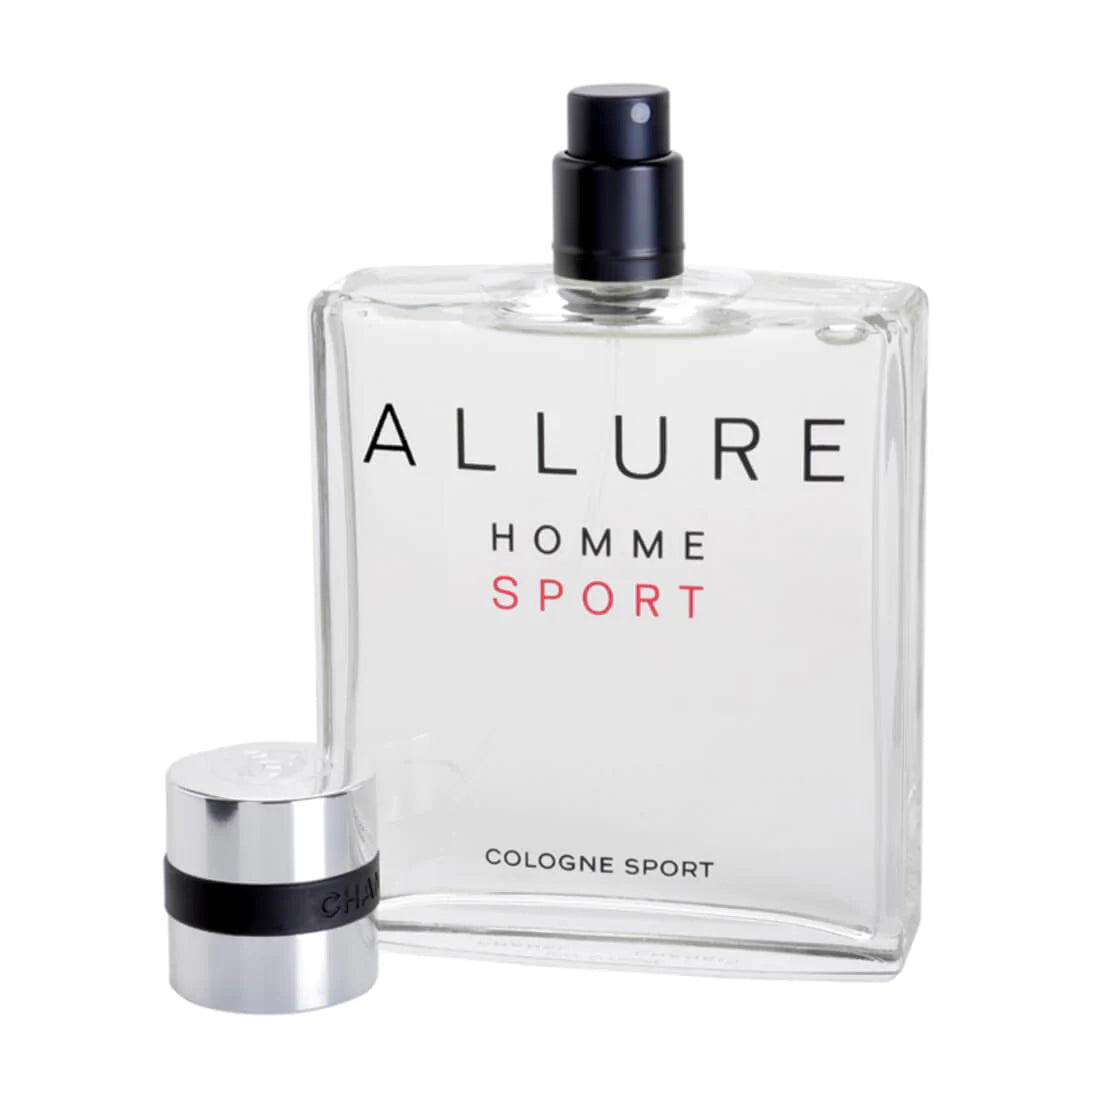 CHANEL Allure Homme Sport 100 ml - Aftershave